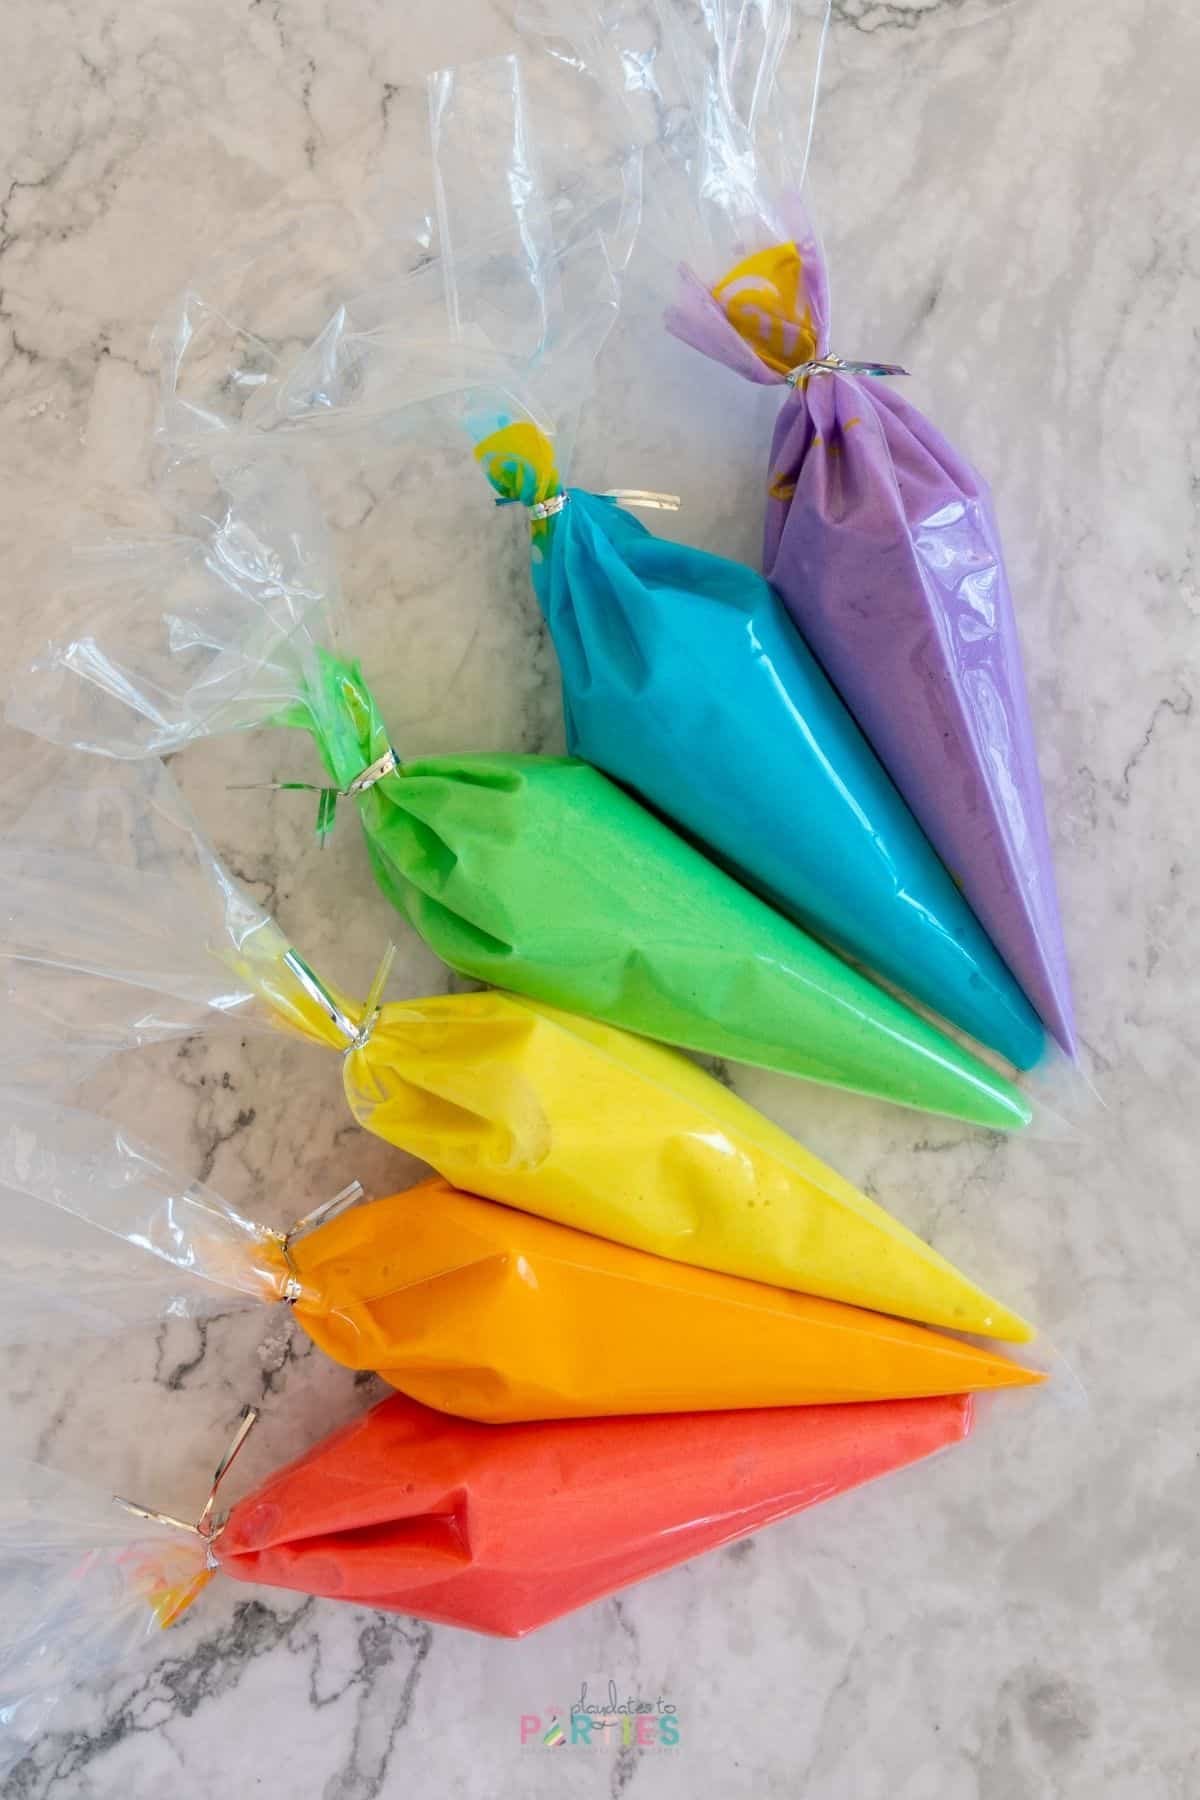 How to Make Rainbow Cupcakes Step 2 - Colored cake batter in piping bags.